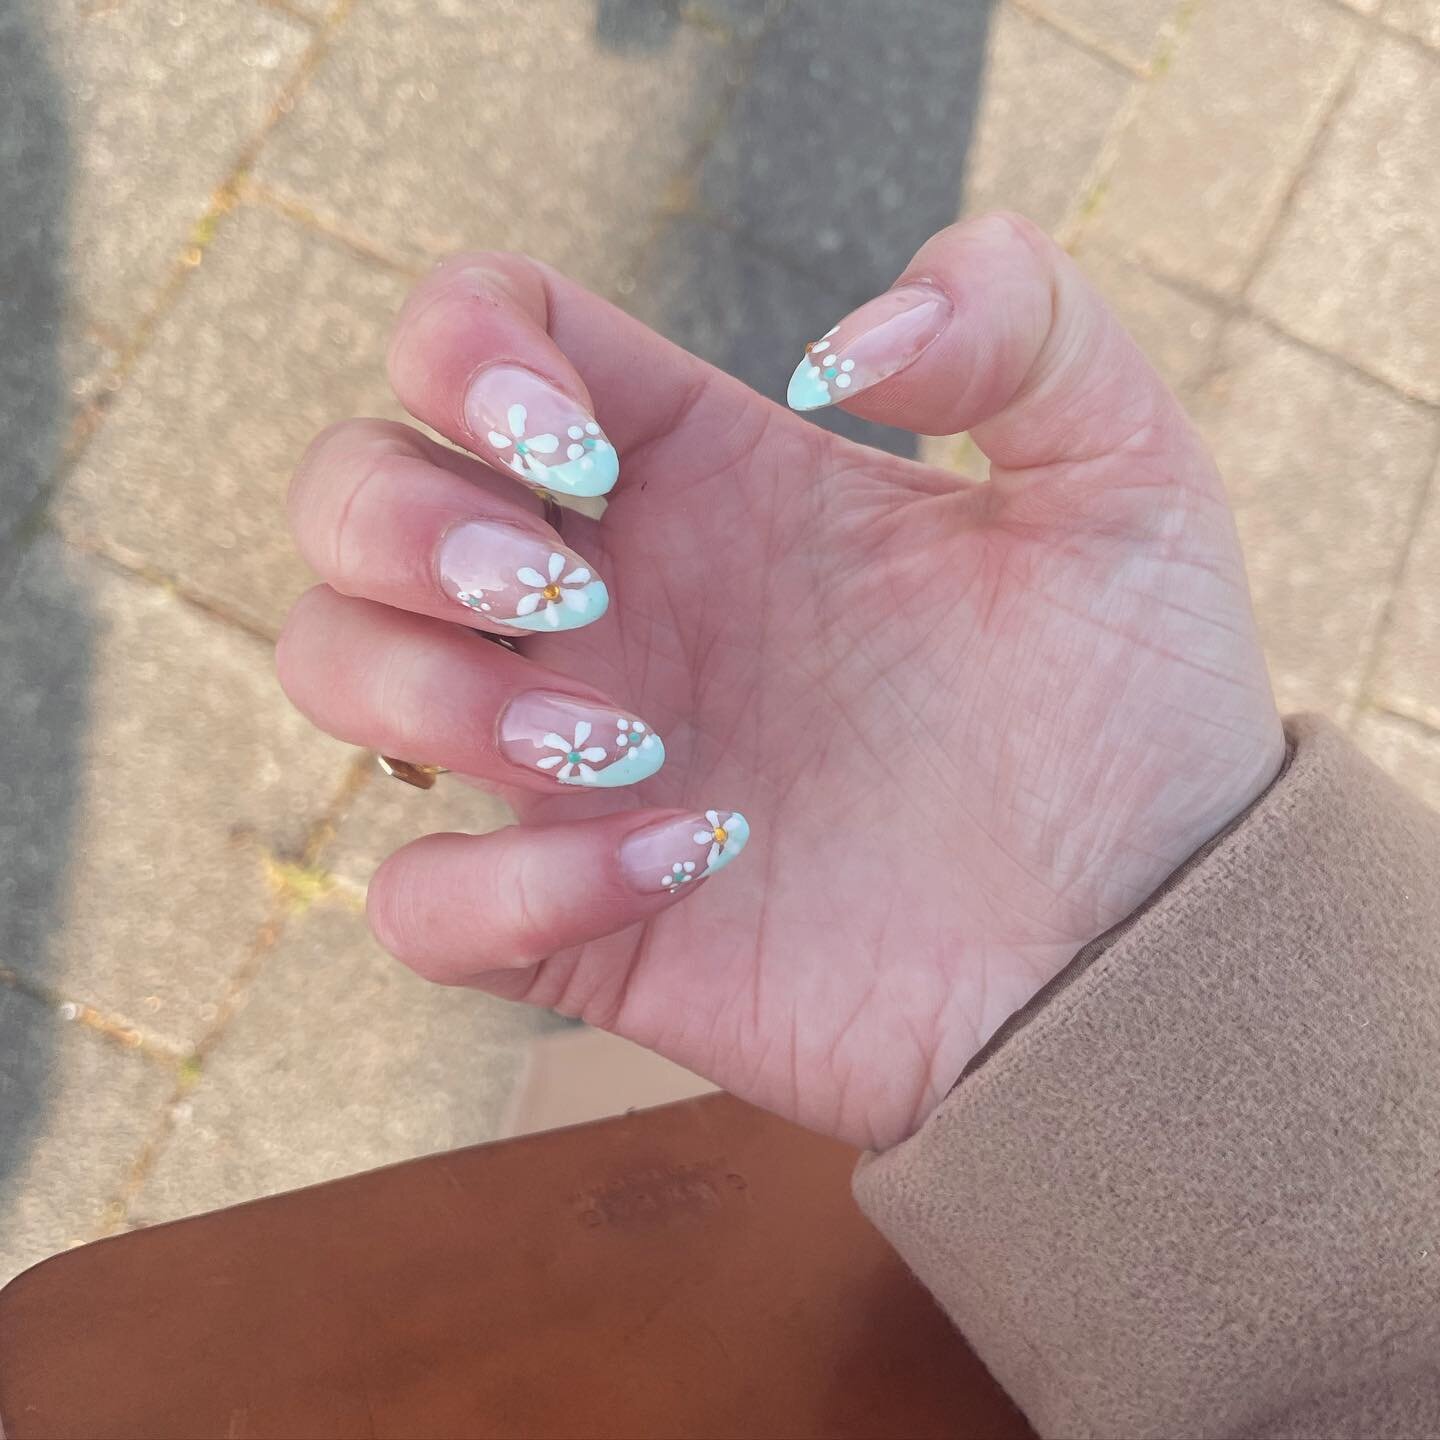 Nature is blooming and skies are blue. 🌸☀️This weather asks for light airy colors! 

💅🏻sheer pink gel polish, with mint green diagonal french and white flowers.  All Young nails products! 

#flowernail #flowernailart #gelpolishflowers #gelpolishde